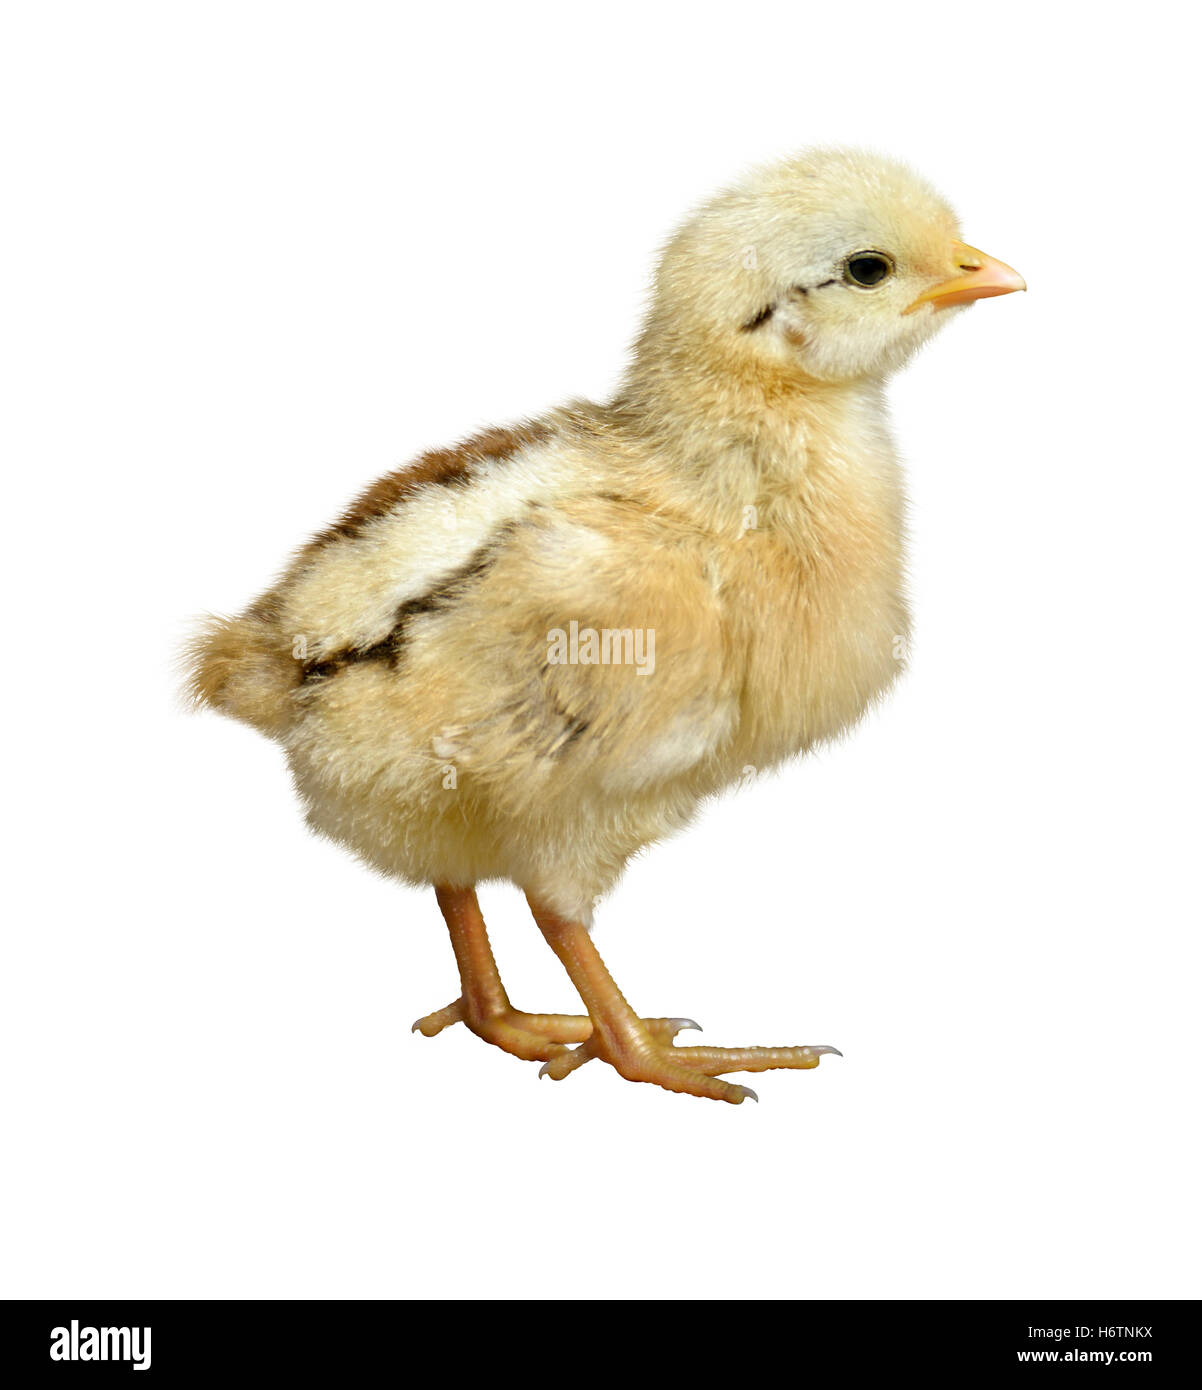 closeup animal bird wild small tiny little short wildlife cub baby chick chicken young younger yellow nature white background Stock Photo